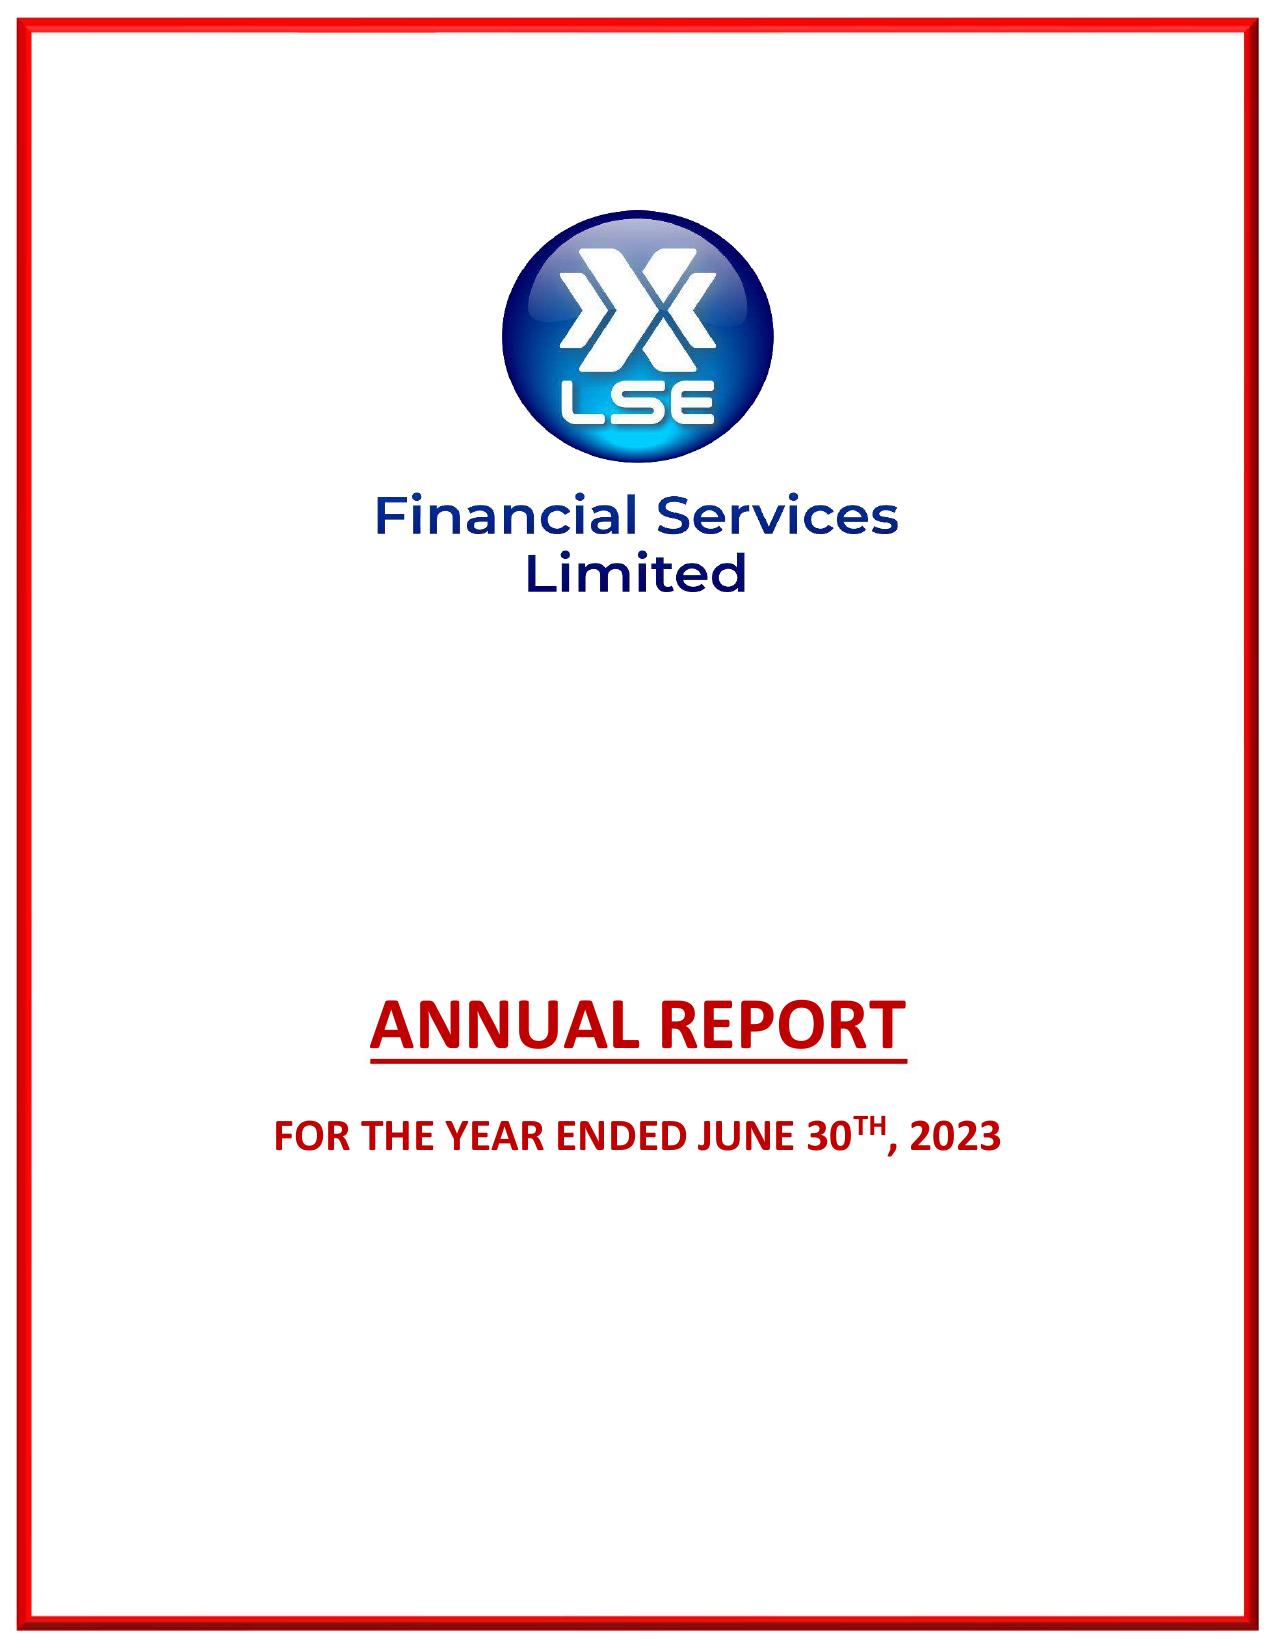 IMPLATS 2023 Annual Report